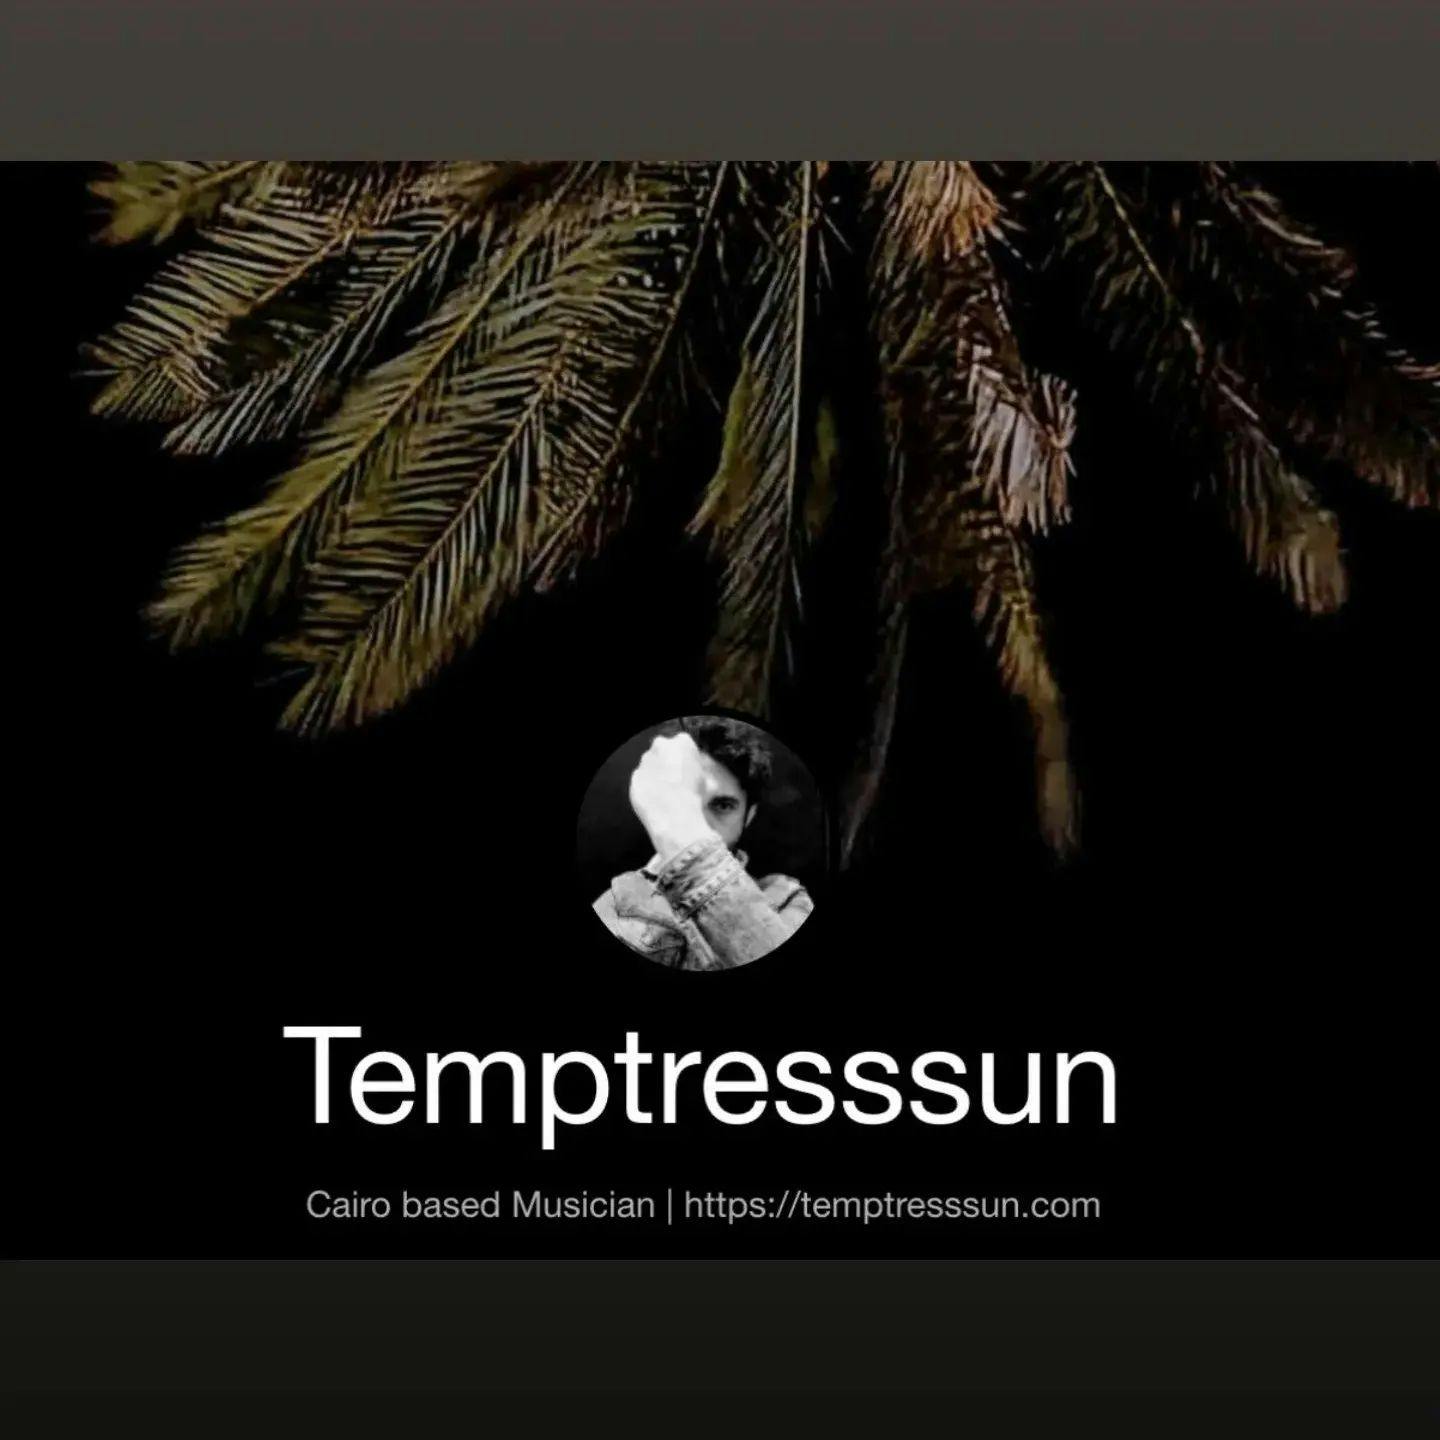 Sign up now to the newsletter if you want to stay updated with all news & activities. Also for exclusive content @ https://temptresssun.com
#linkinbio @temptress_sun 

#roots #beautiful #scenery #debate #endless_talks #uprising #lullaby #temptress #sun #temptresssun  #music #album #outnow #nowplaying #photography #youtube #Spotify #SoundCloud #bandcamp #AppleMusic #mechanical #dream #mechanical_dream #dontbreakmyheart #reverbnation #anghami #Twitter #cairo #Egypt